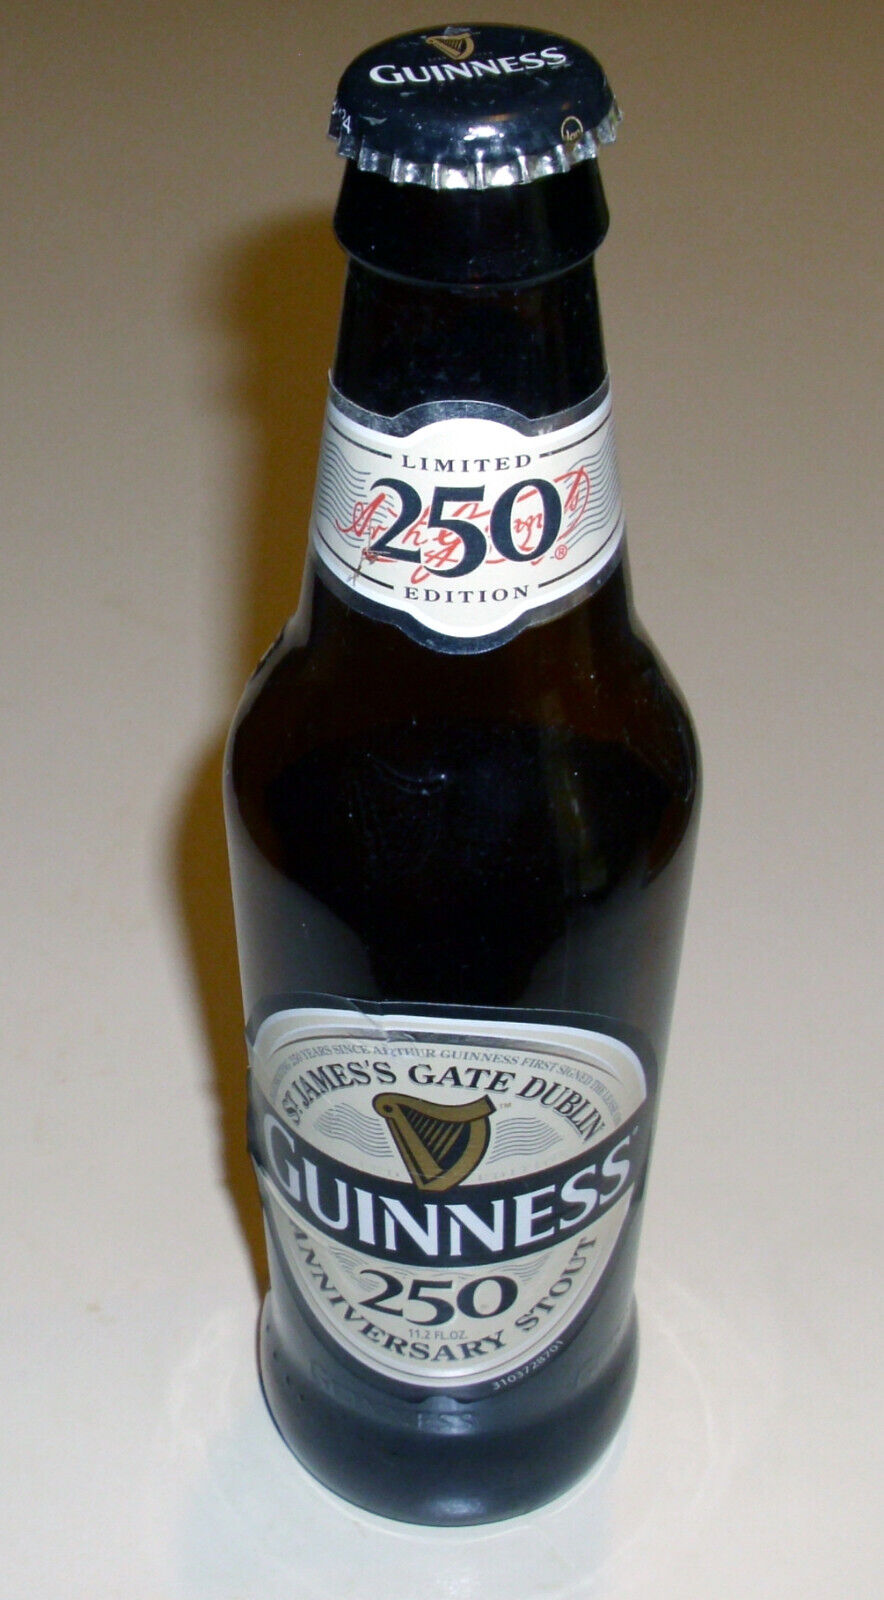 2009 Guinness 250 anniversary stout limited edition bottle - empty